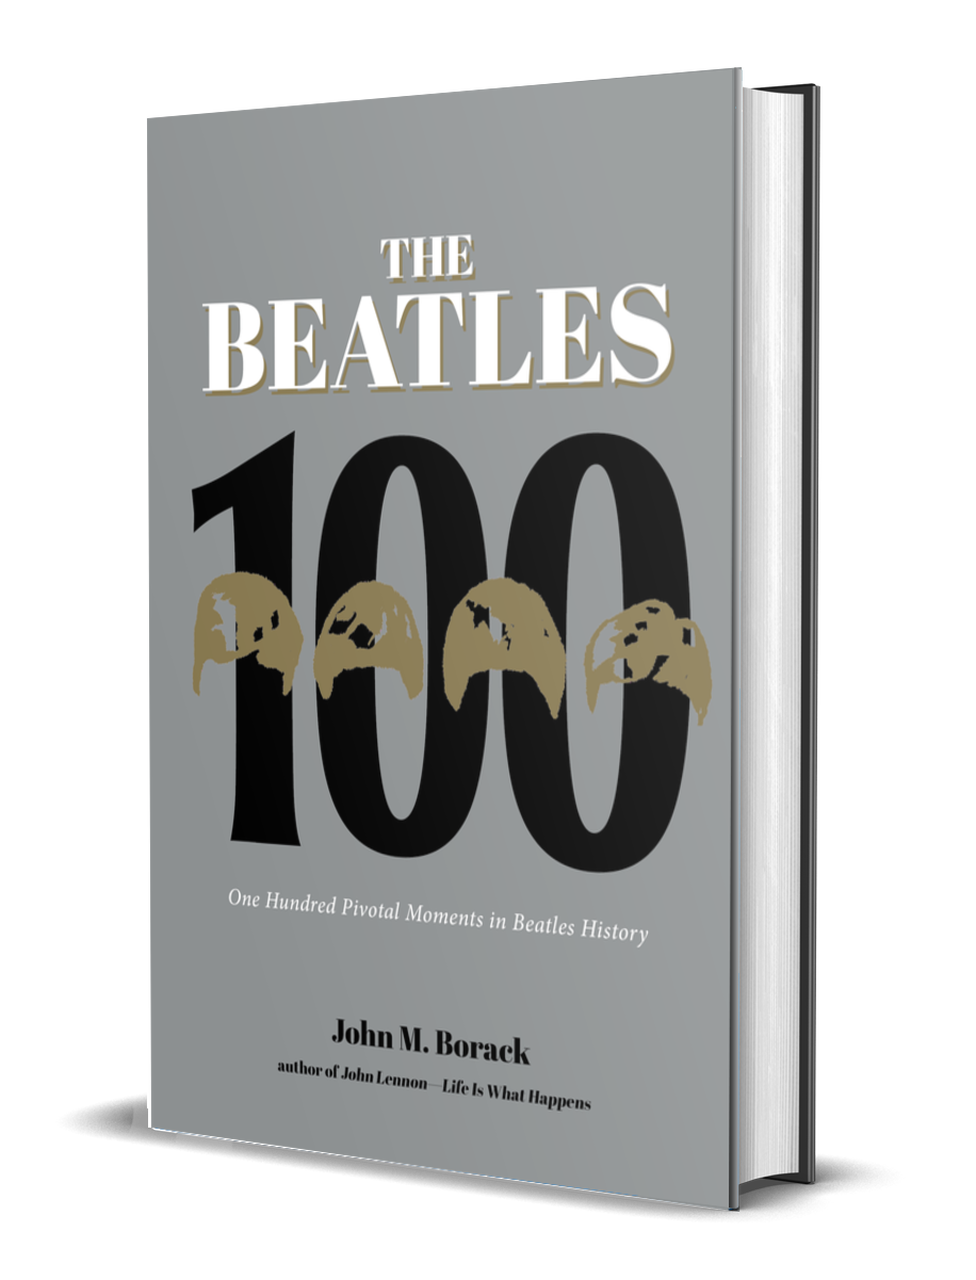 THE BEATLES 100: ONE HUNDRED PIVOTAL MOMENTS IN BEATLES HISTORY BOOK